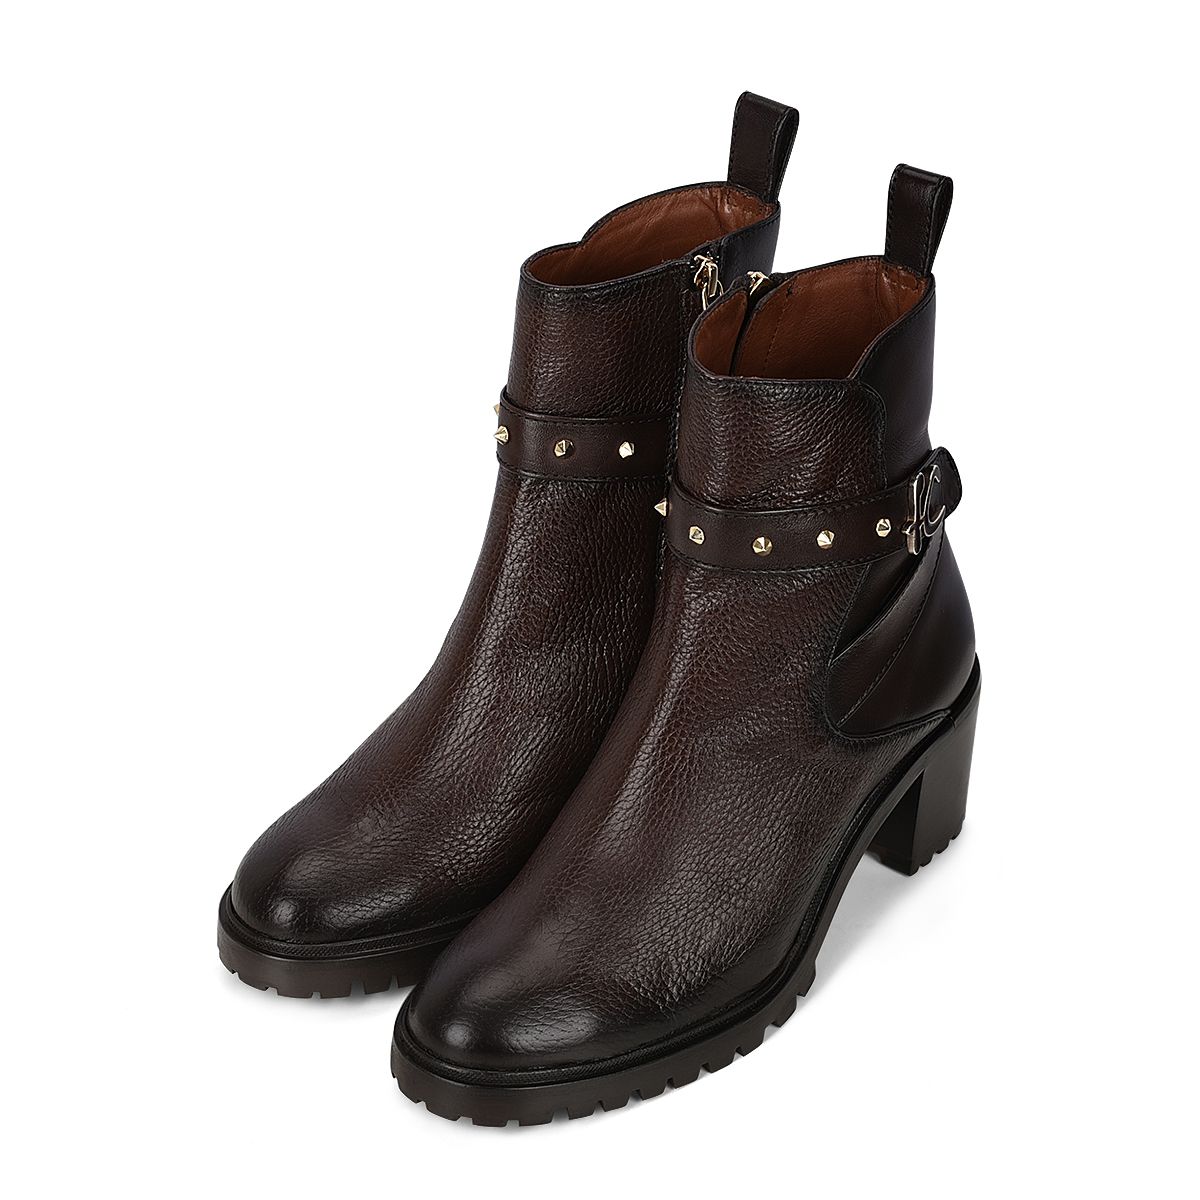 K35VNTS - Cuadra brown casual fashion deer leather ankle boots for women-Kuet.us